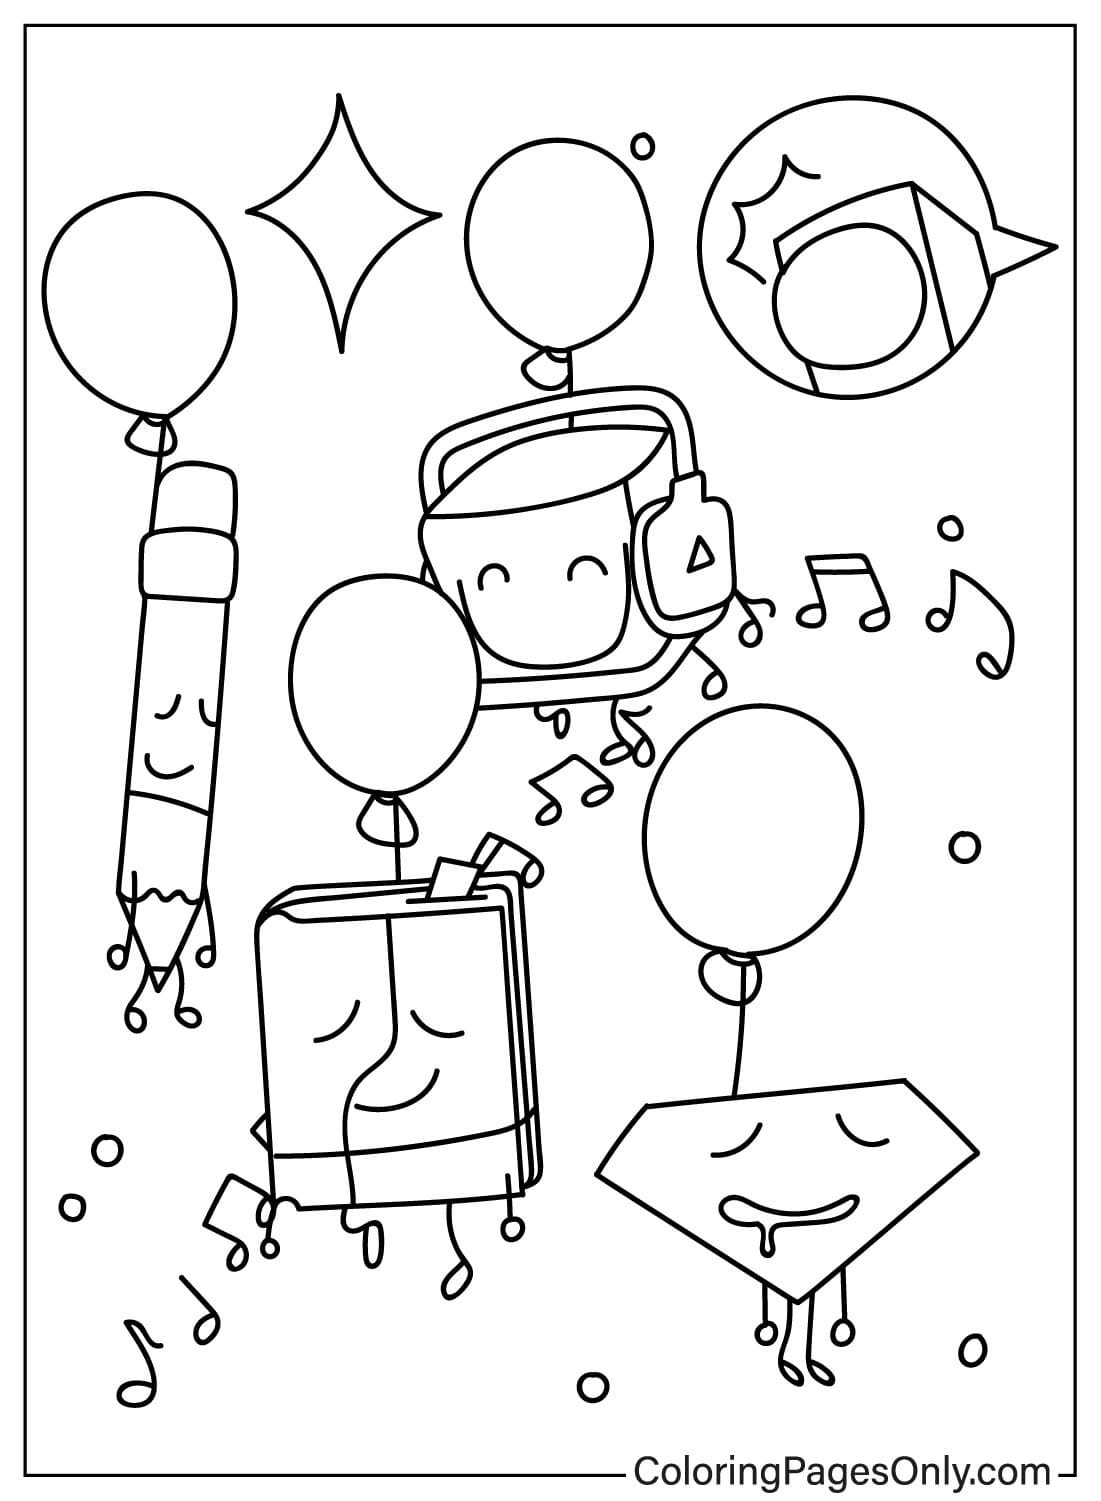 Dream Island Images Coloring Page ...